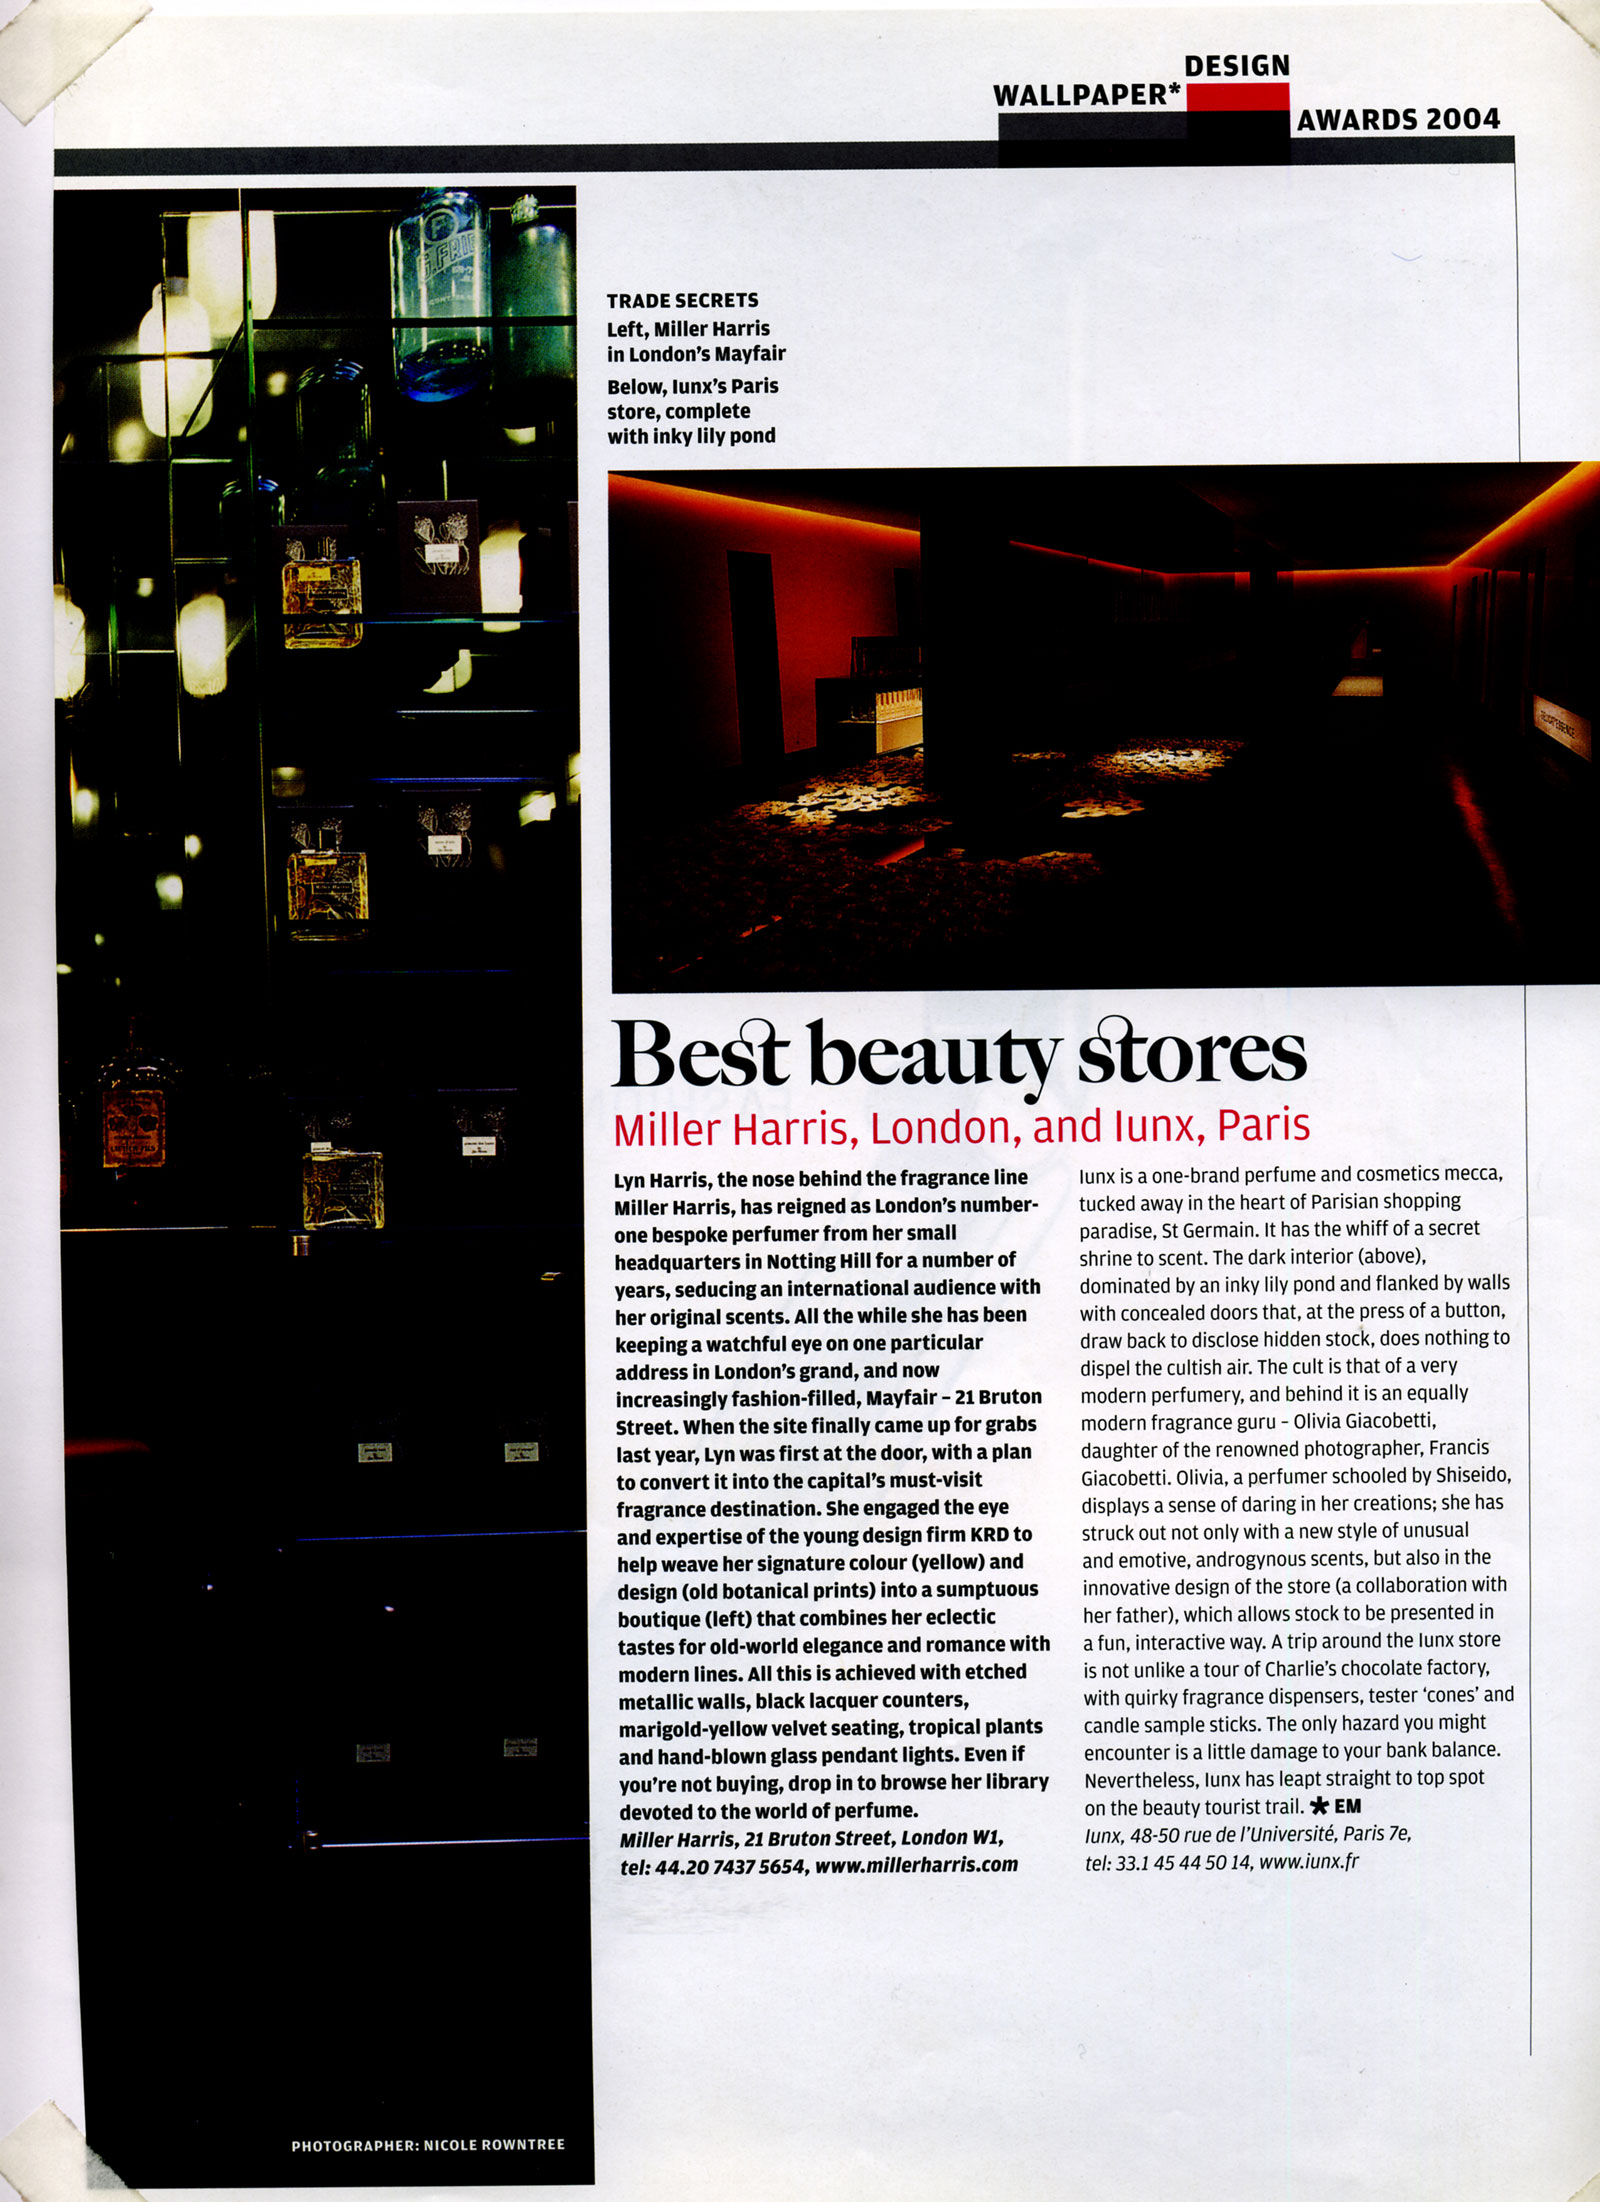 Best Beauty Stores Wallpaper Design Awards - One From Moonstrips Empire News, 99 Of 100 Images And , HD Wallpaper & Backgrounds